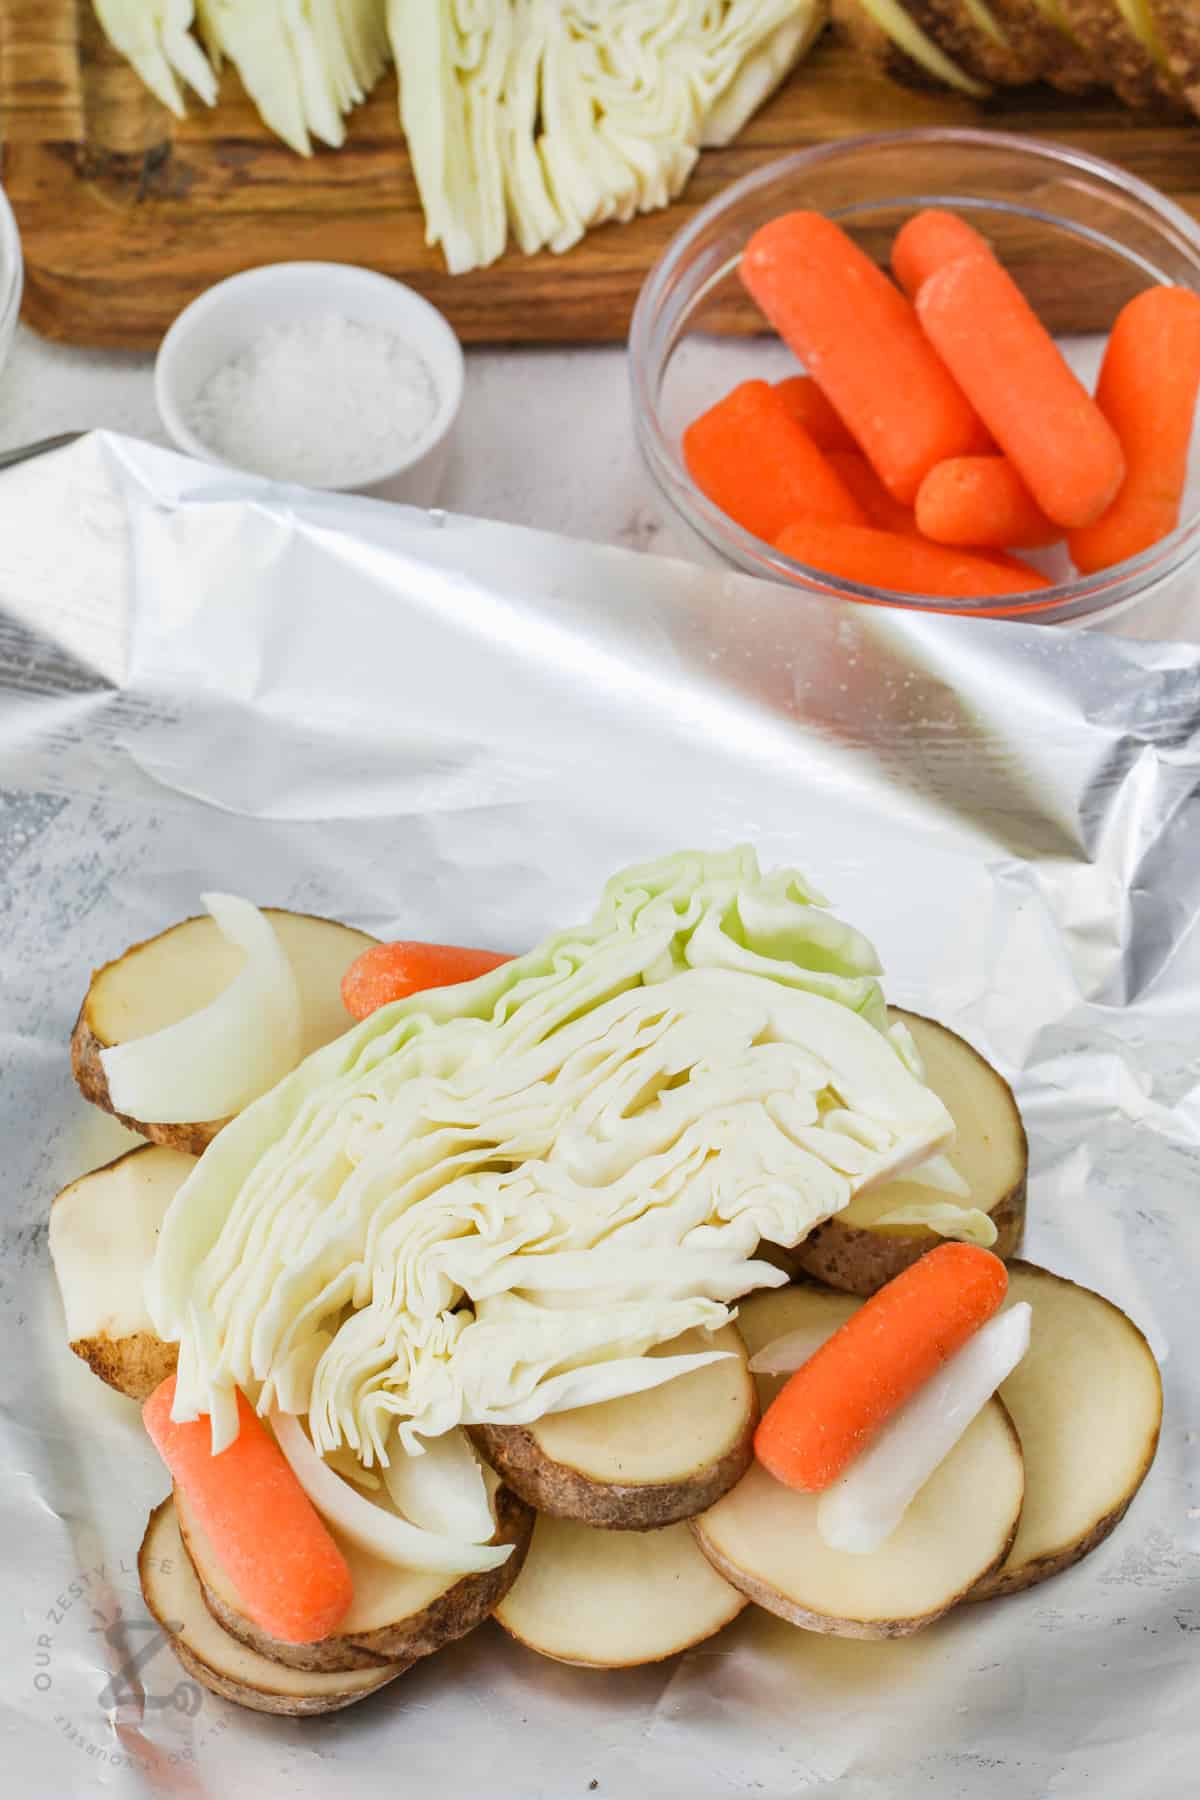 adding cabbage to foil to make Cabbage and Potato Foil Packs